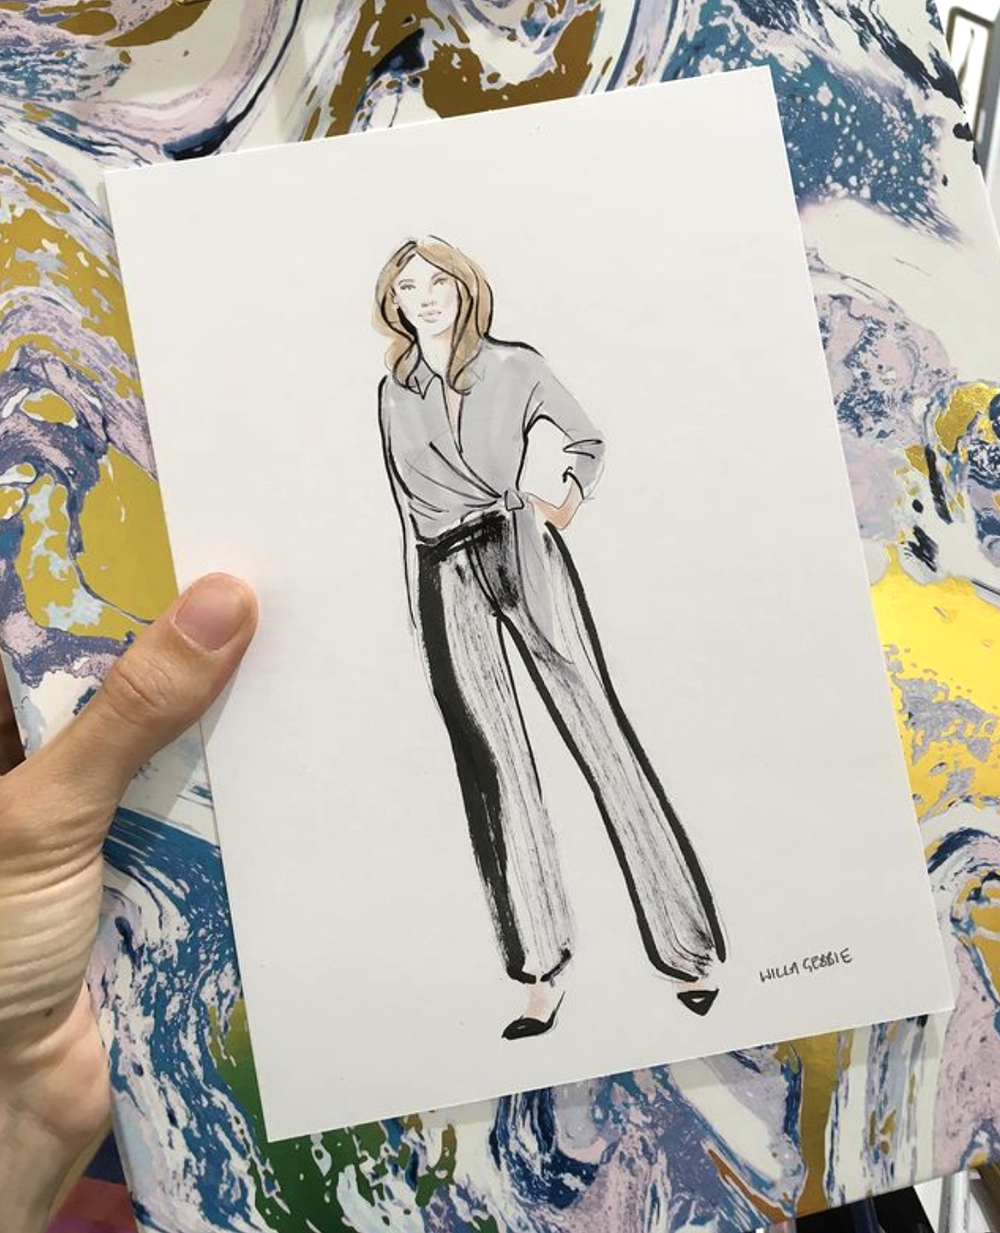 Live fashion illustration events in London by Willa Gebbie